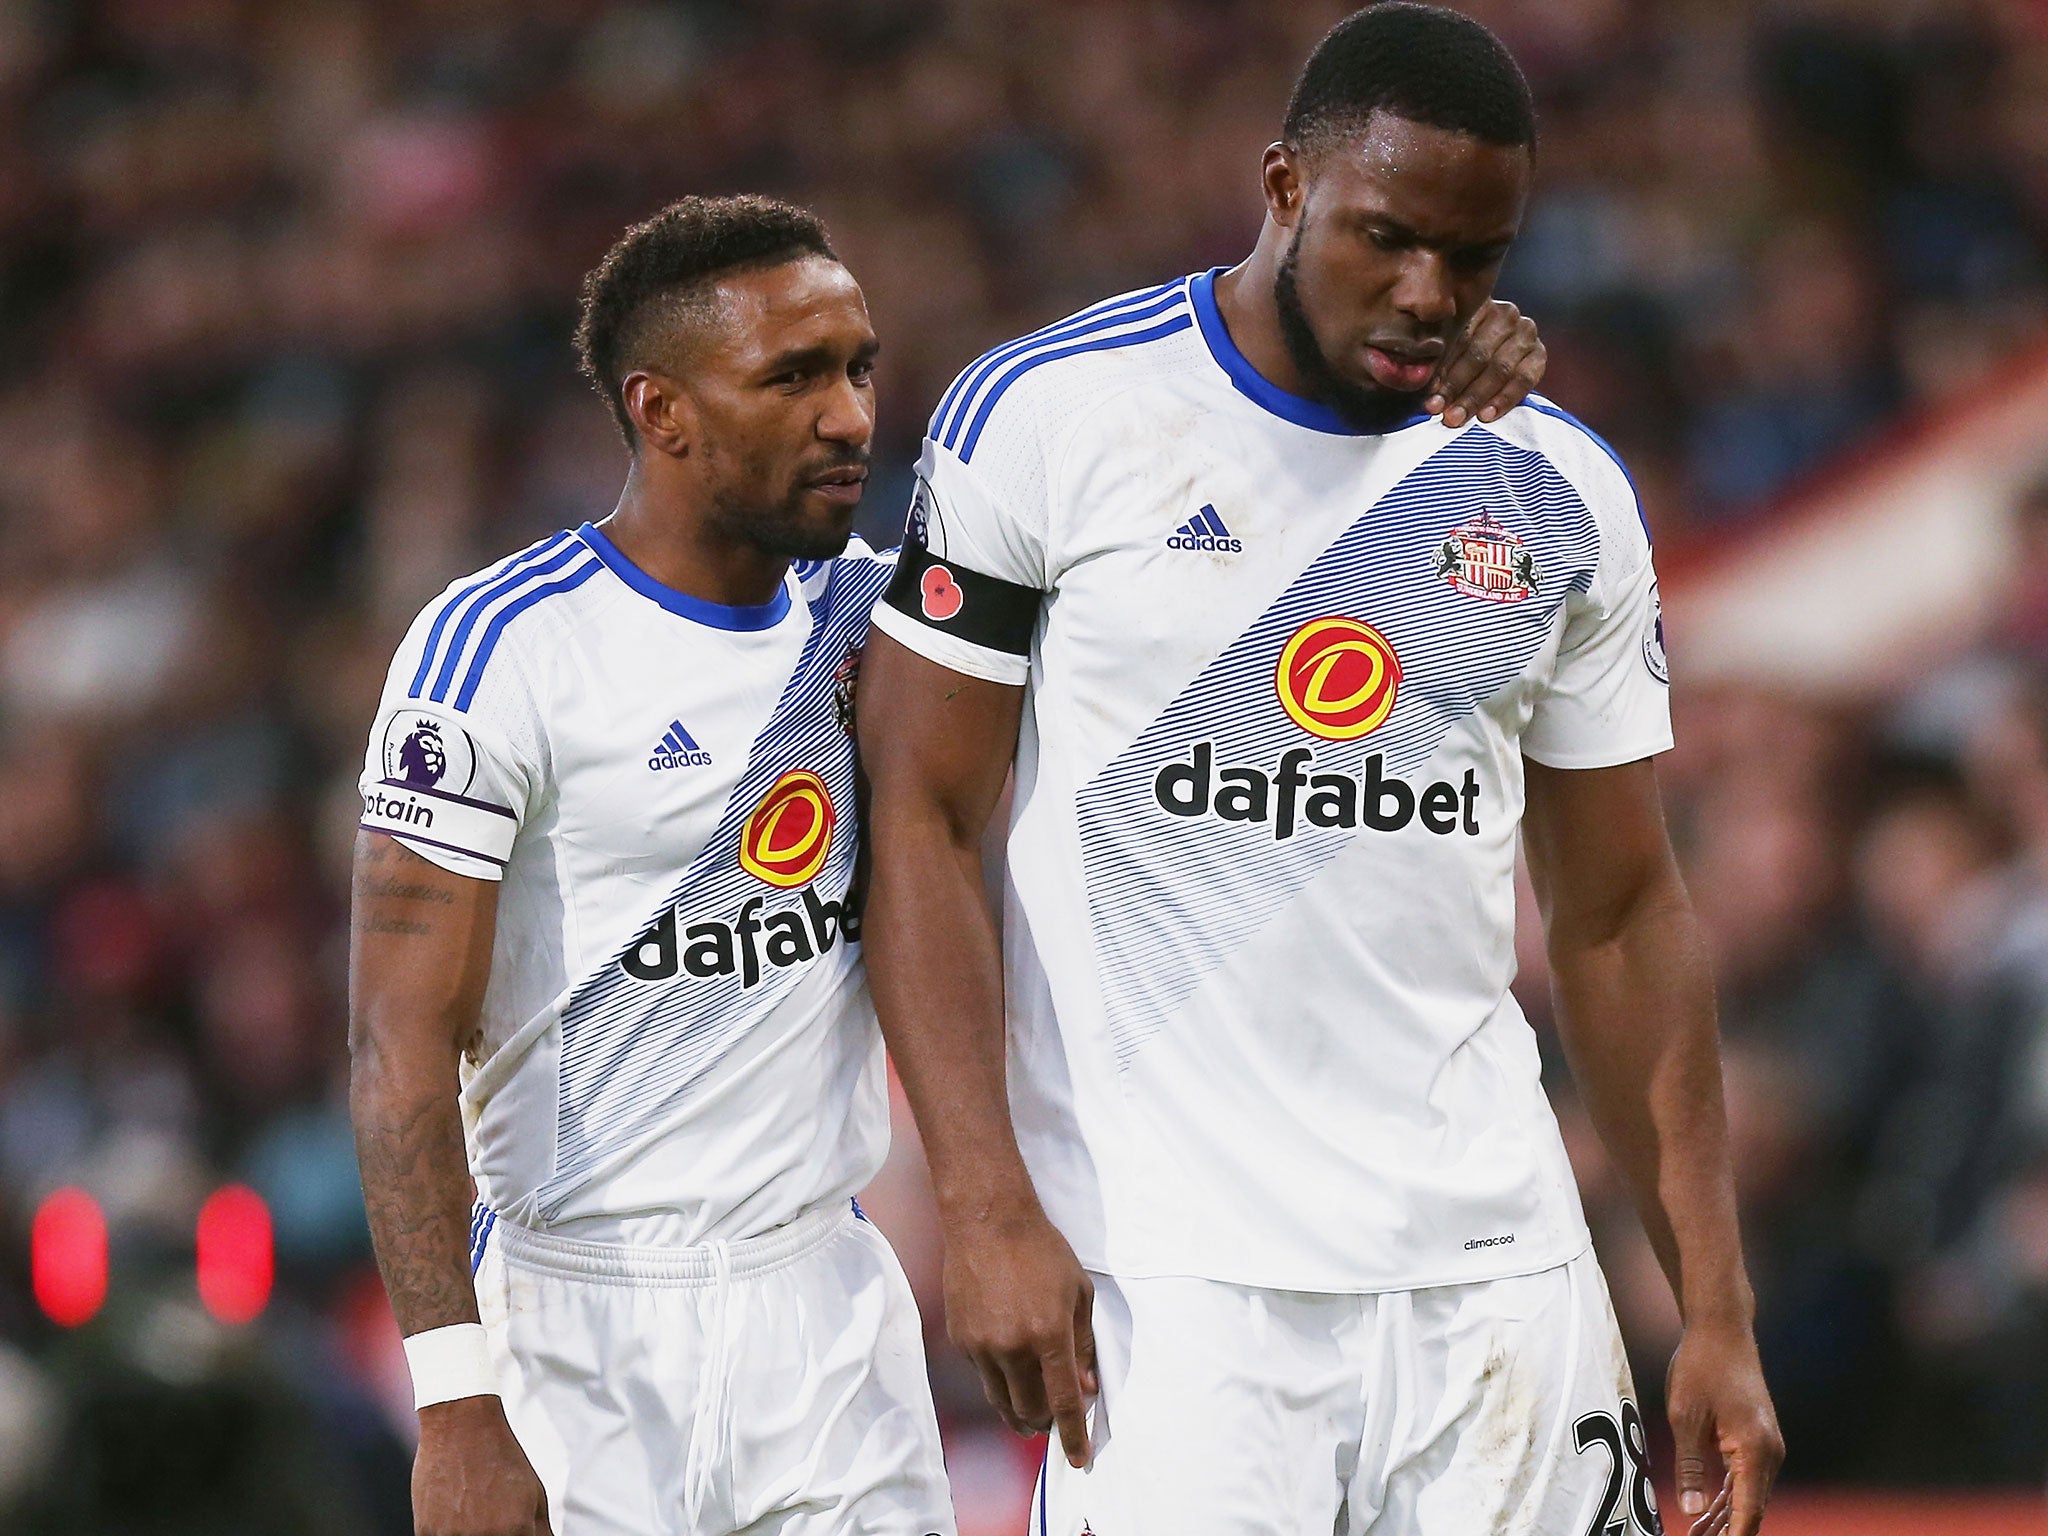 Defoe and Anichebe's recent form has offered Sunderland hope of staying up this season